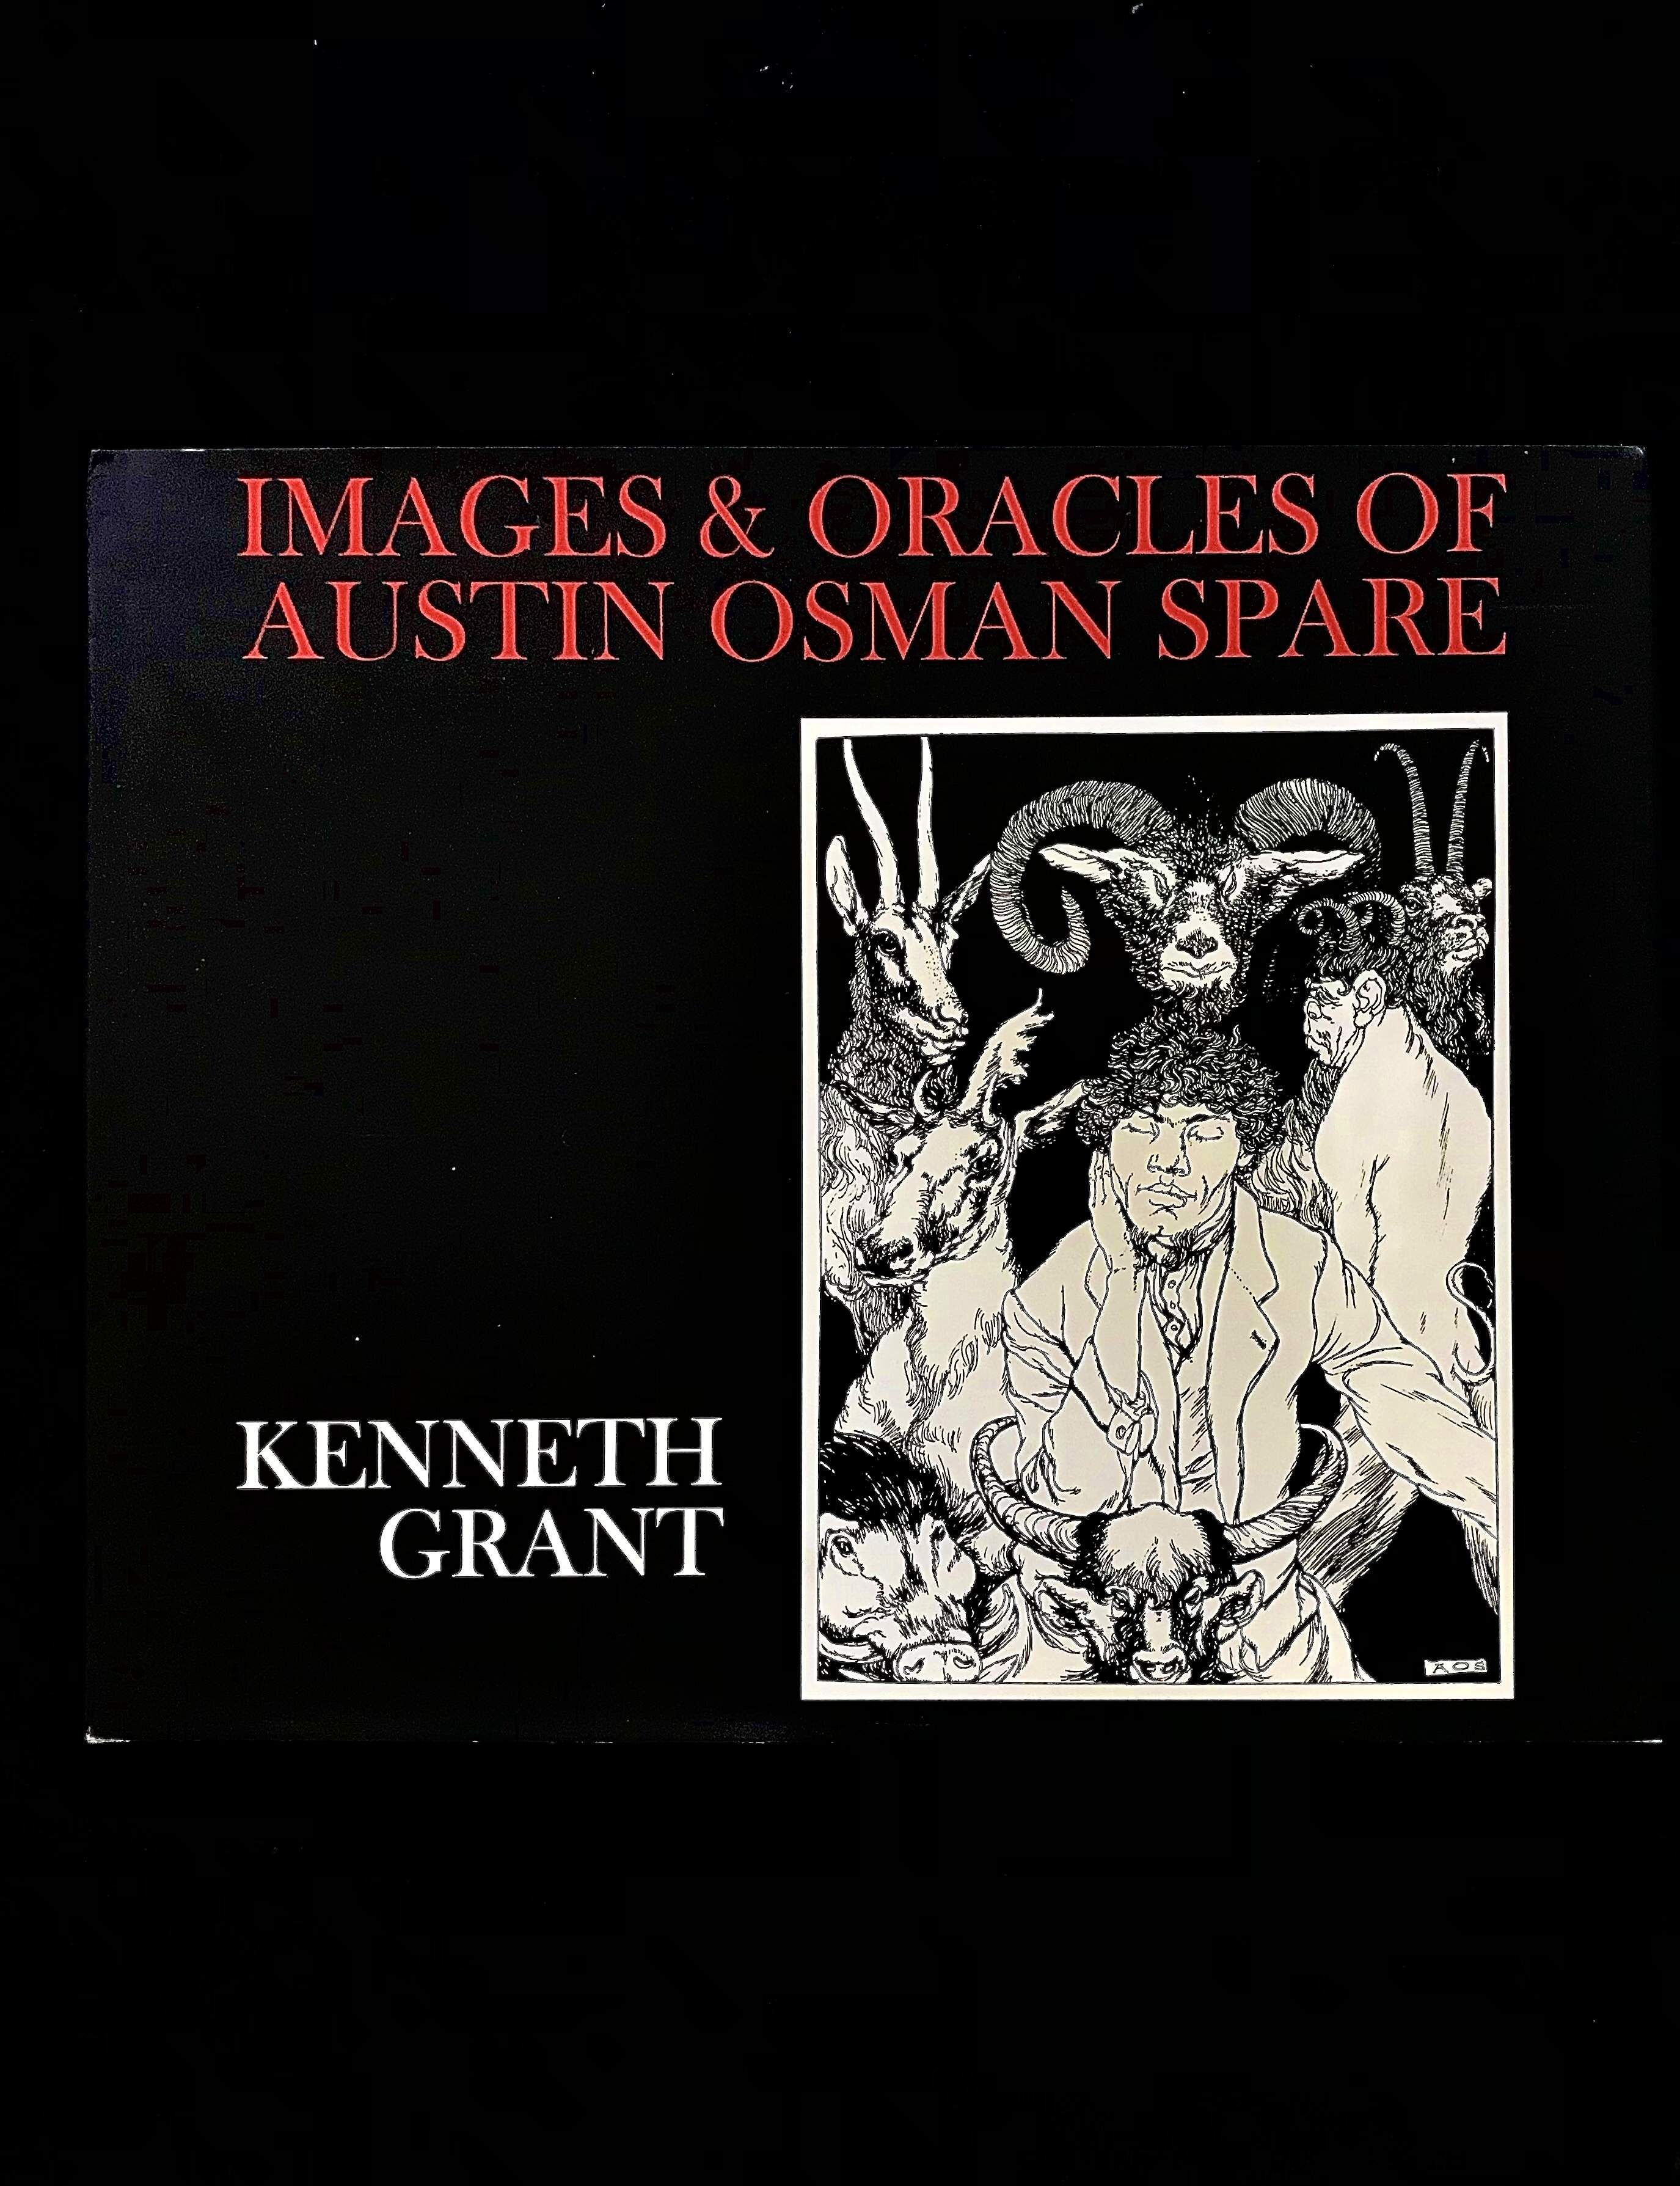 Images & Oracles of Austin Osman Spare by Kenneth Grant